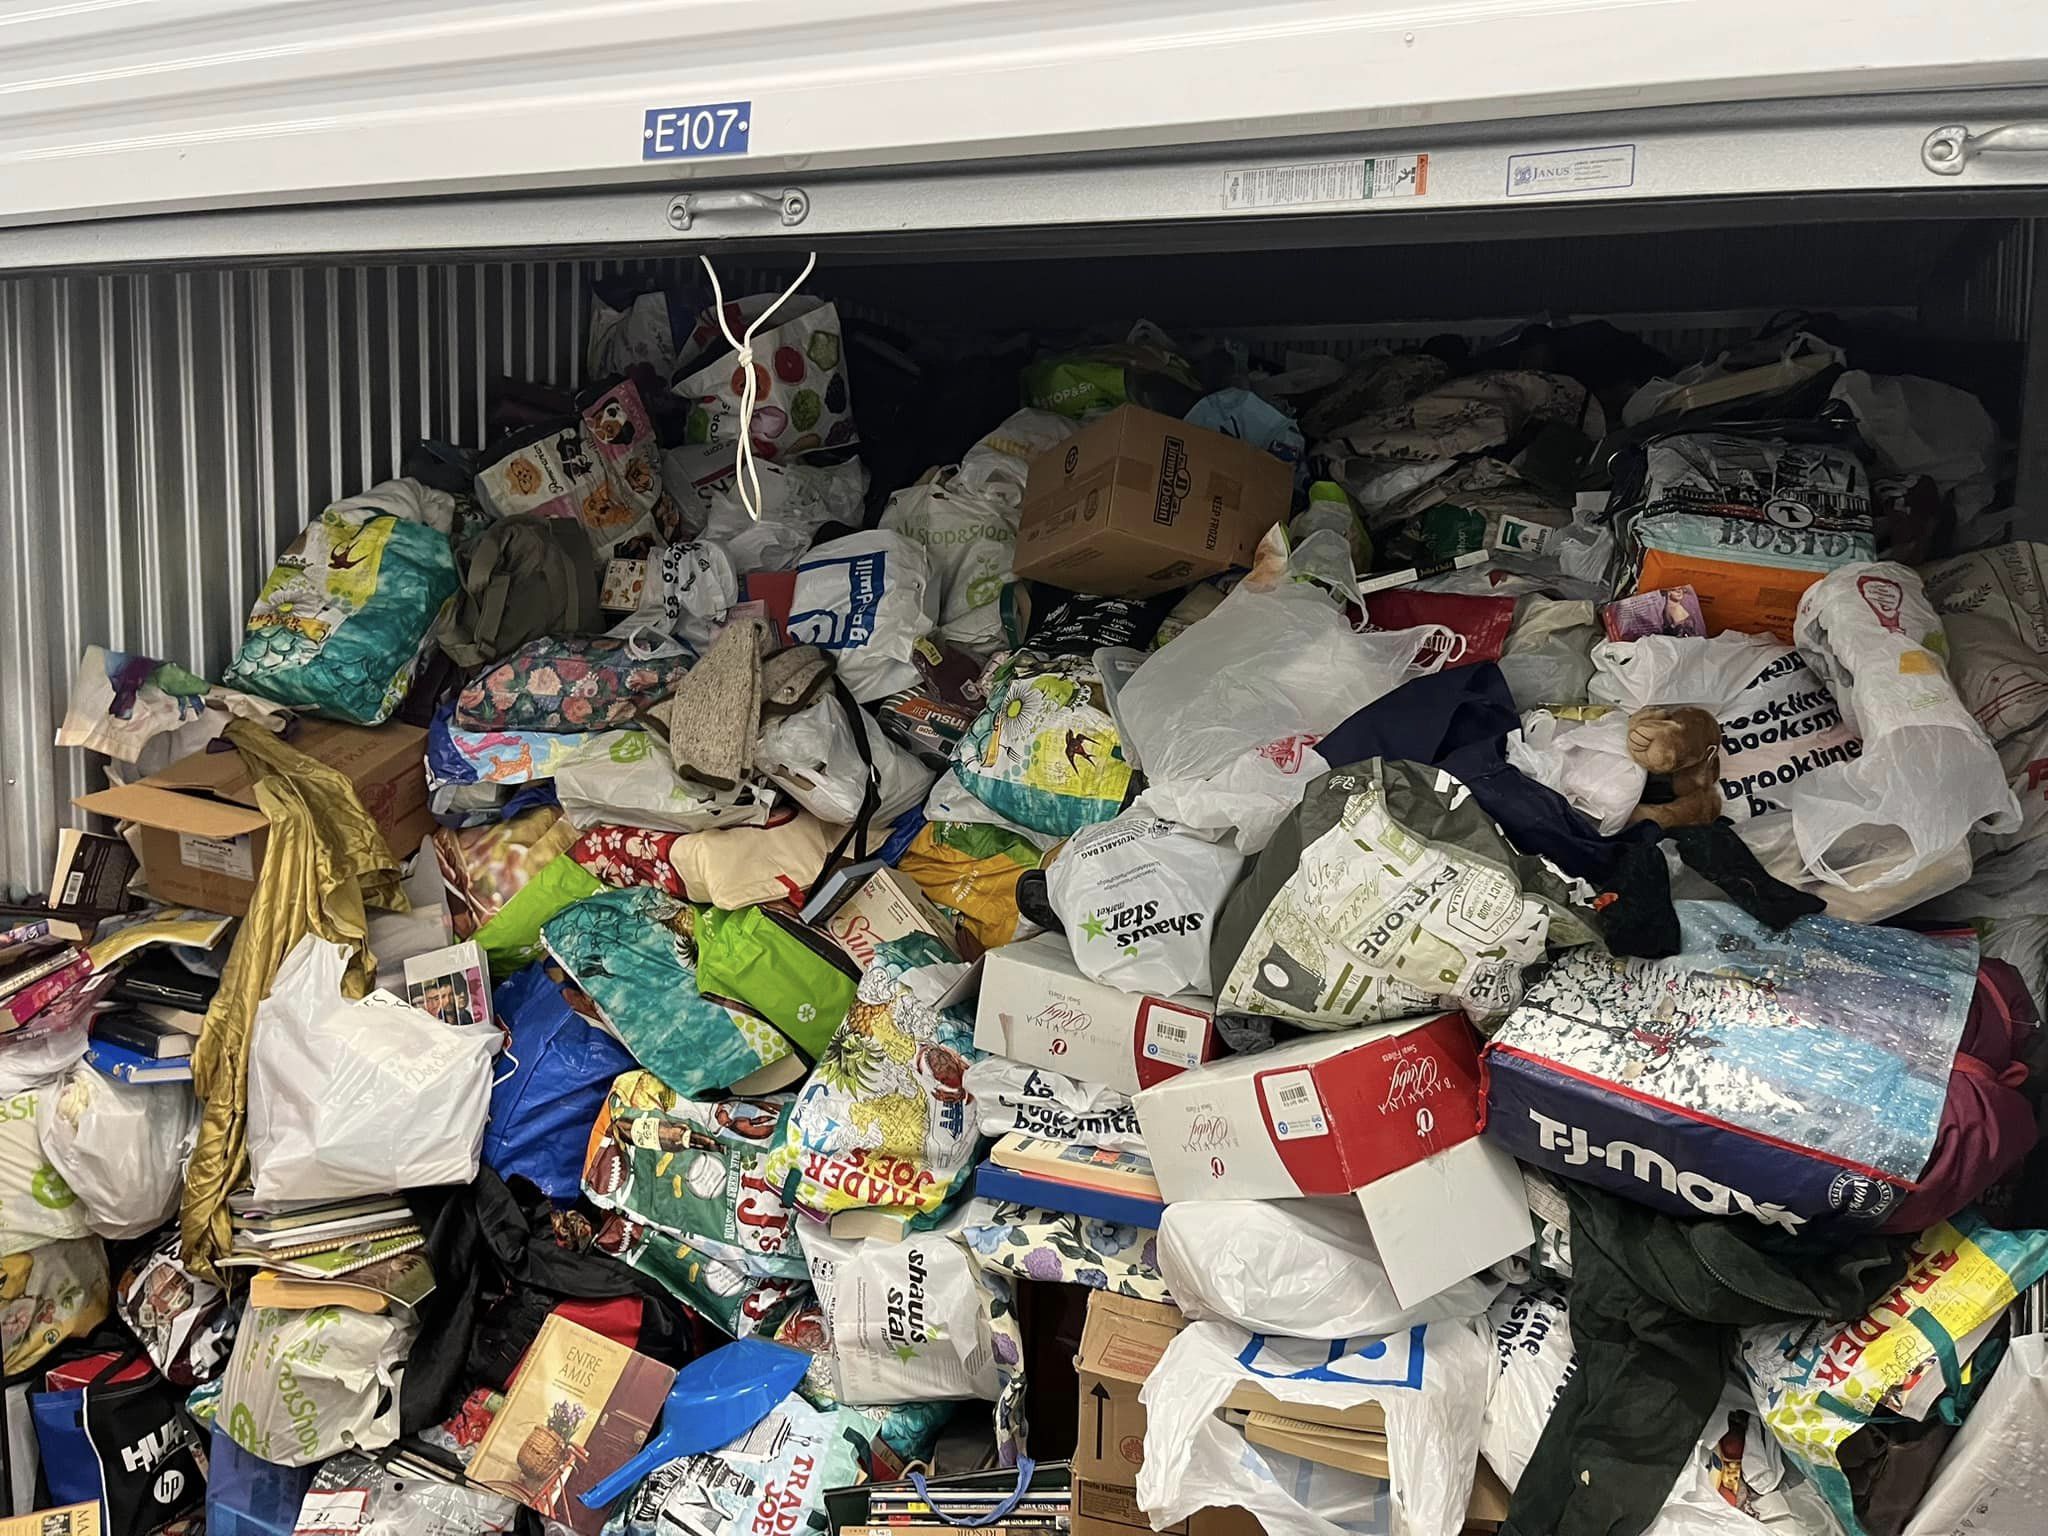 hoarding cleanout needed in a self-storage unit